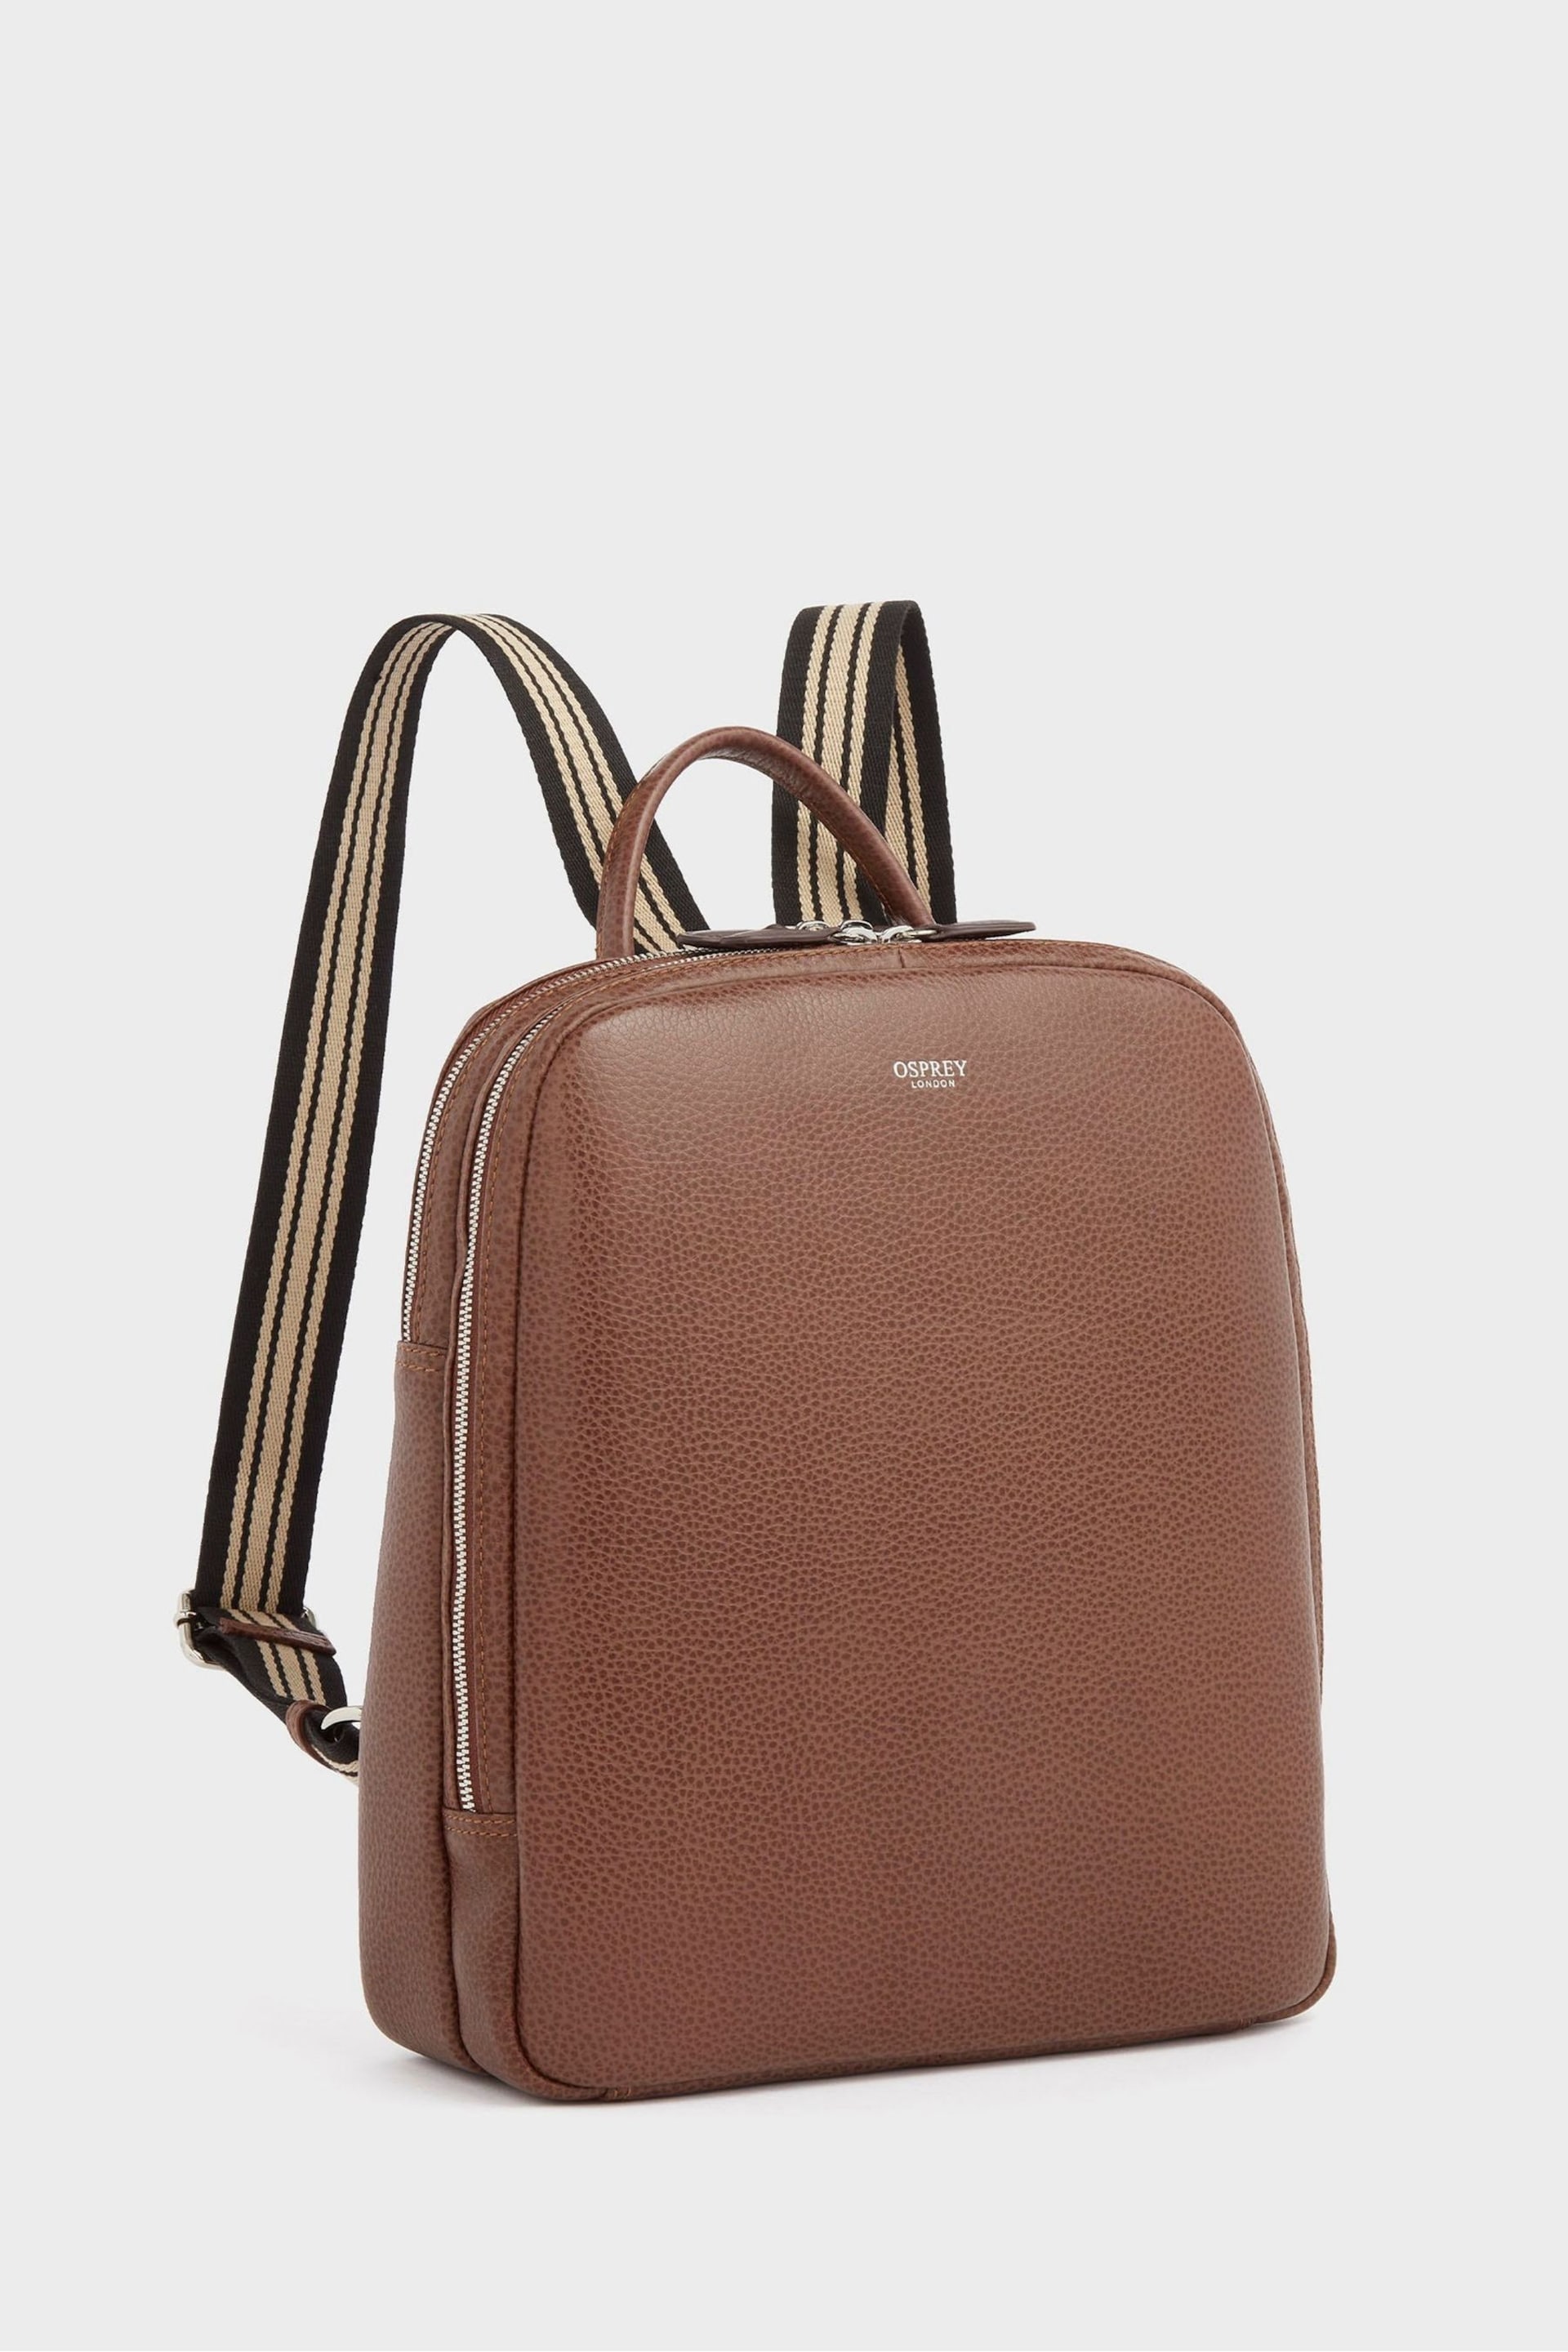 Osprey London The Chiswick Leather Backpack - Image 3 of 5